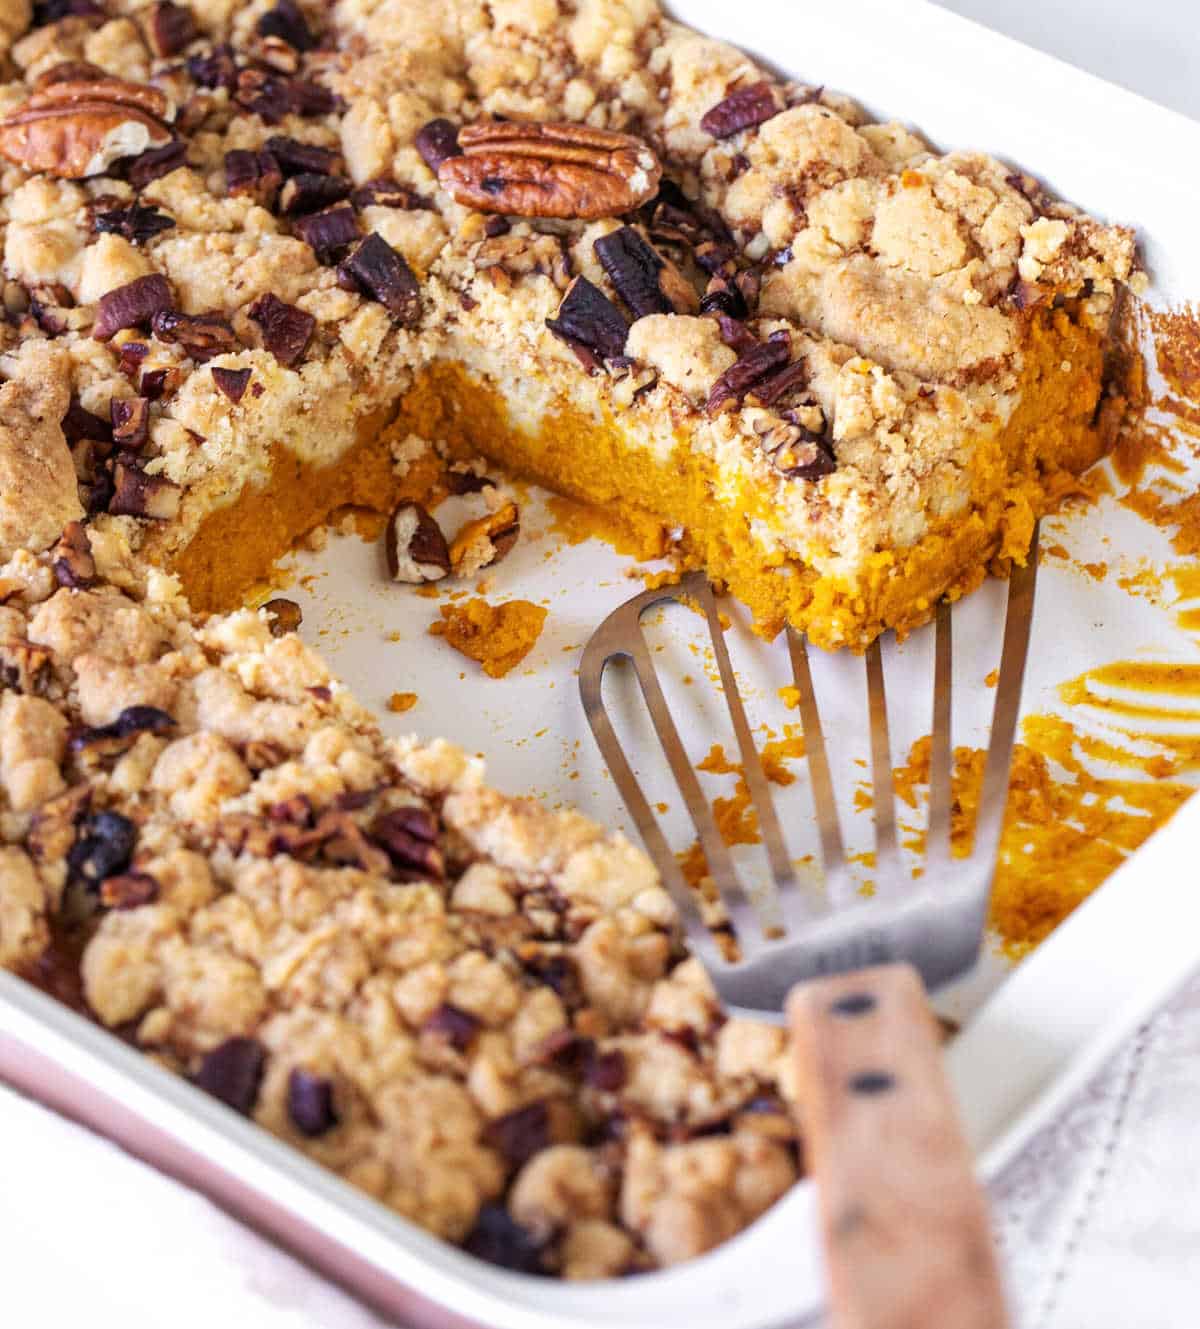 Close of baking dish with pumpkin crumb cake, portions missing, a metal serving spatula